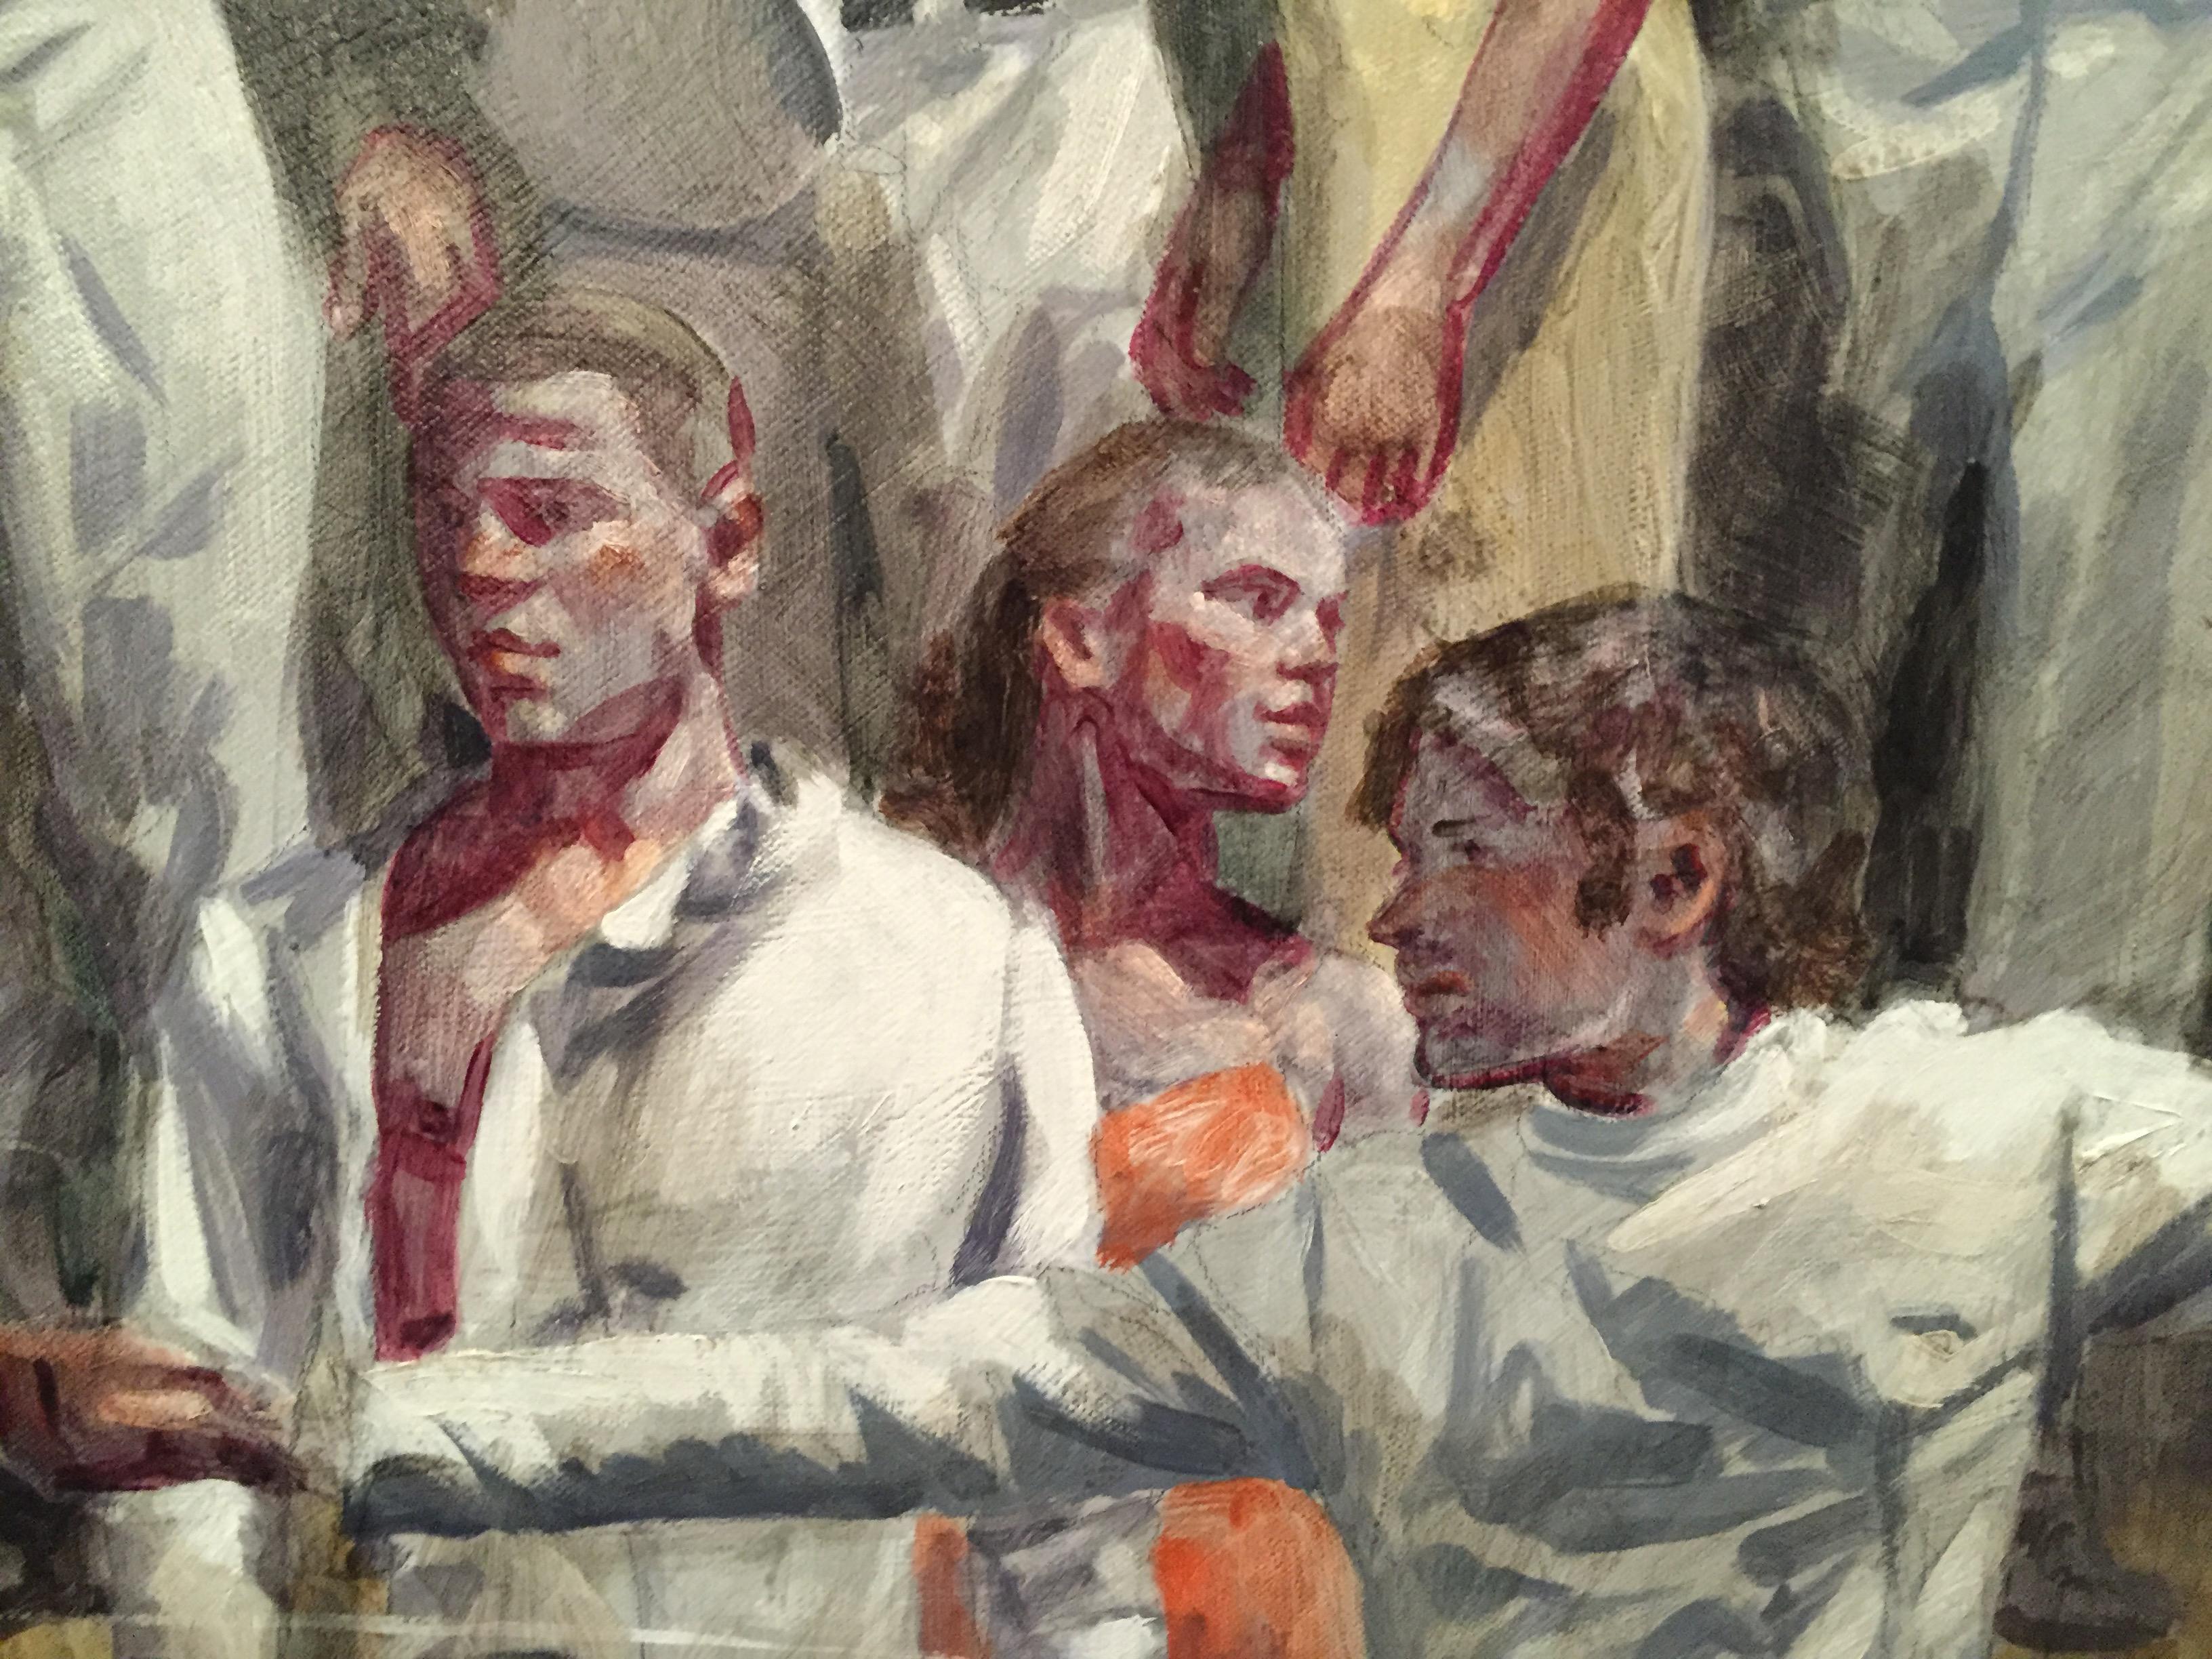 Fencers (Figurative Oil Painting by Mark Beard of Athletes in Sport, Framed) 4